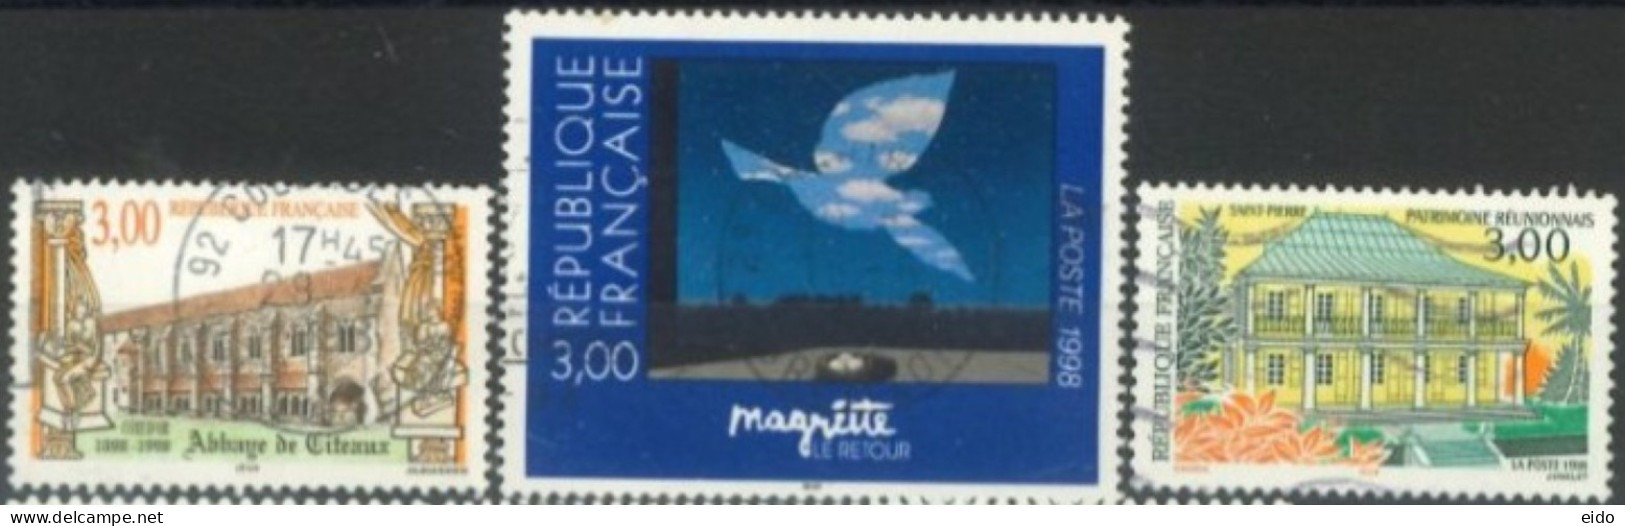 FRANCE - 1998, DIFFERENT OCCASIONS  STAMPS SET OF 3, USED - Gebruikt